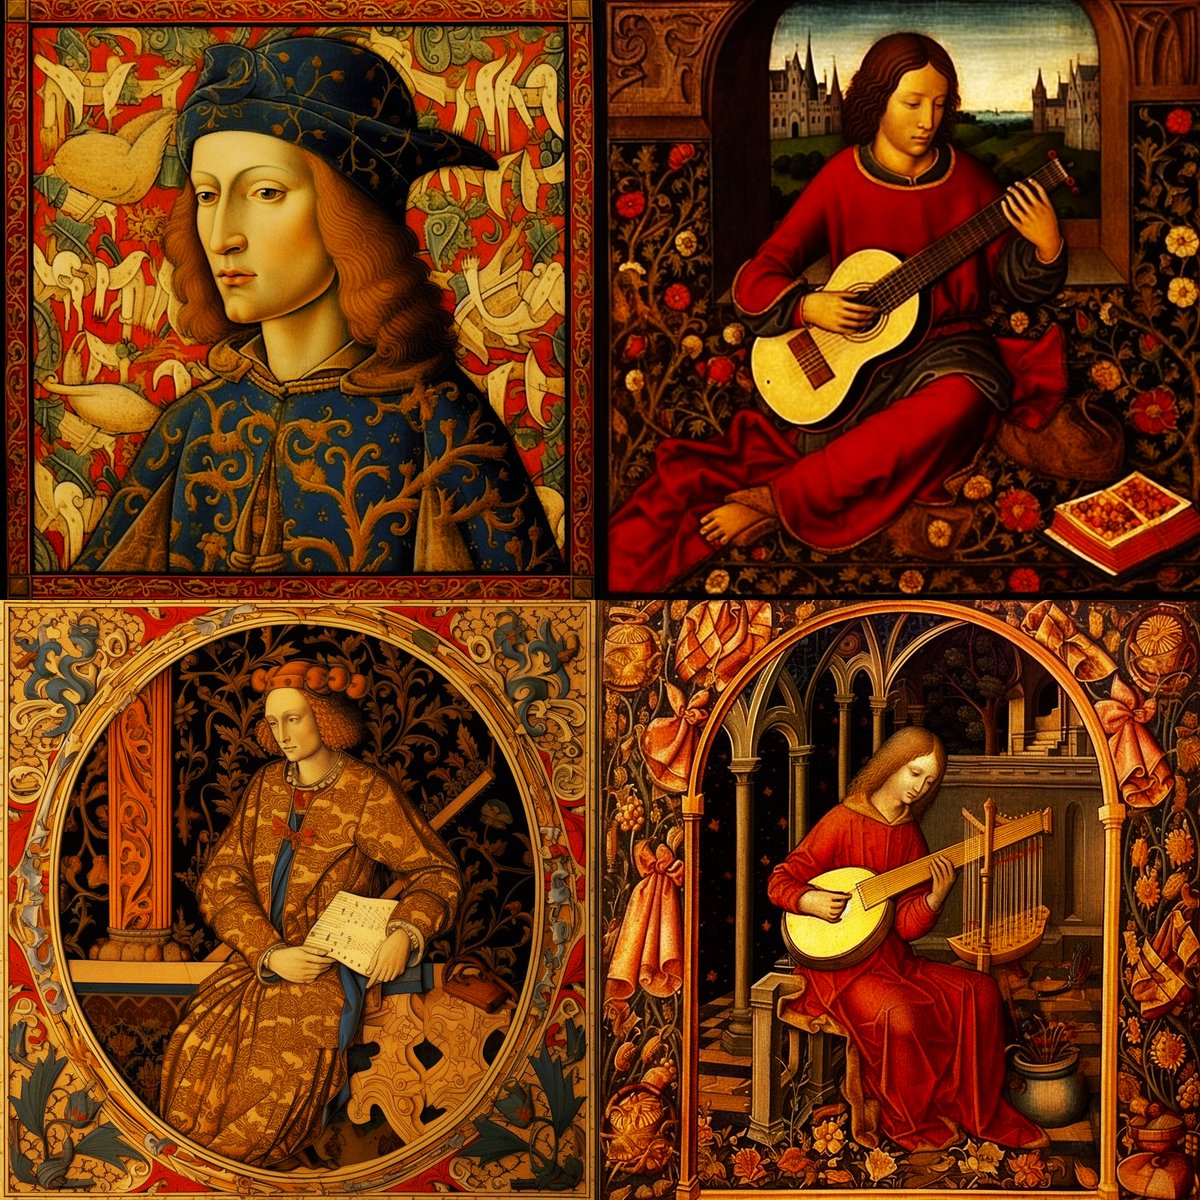 'Diving into the harmonious world of Guillaume de Machaut (1300–1377), a  French poet and composer. His contributions to music and poetry during  the Medieval period continue to inspire and captivate.  #GuillaumeDeMachaut #MedievalMusic #NowPlaying'